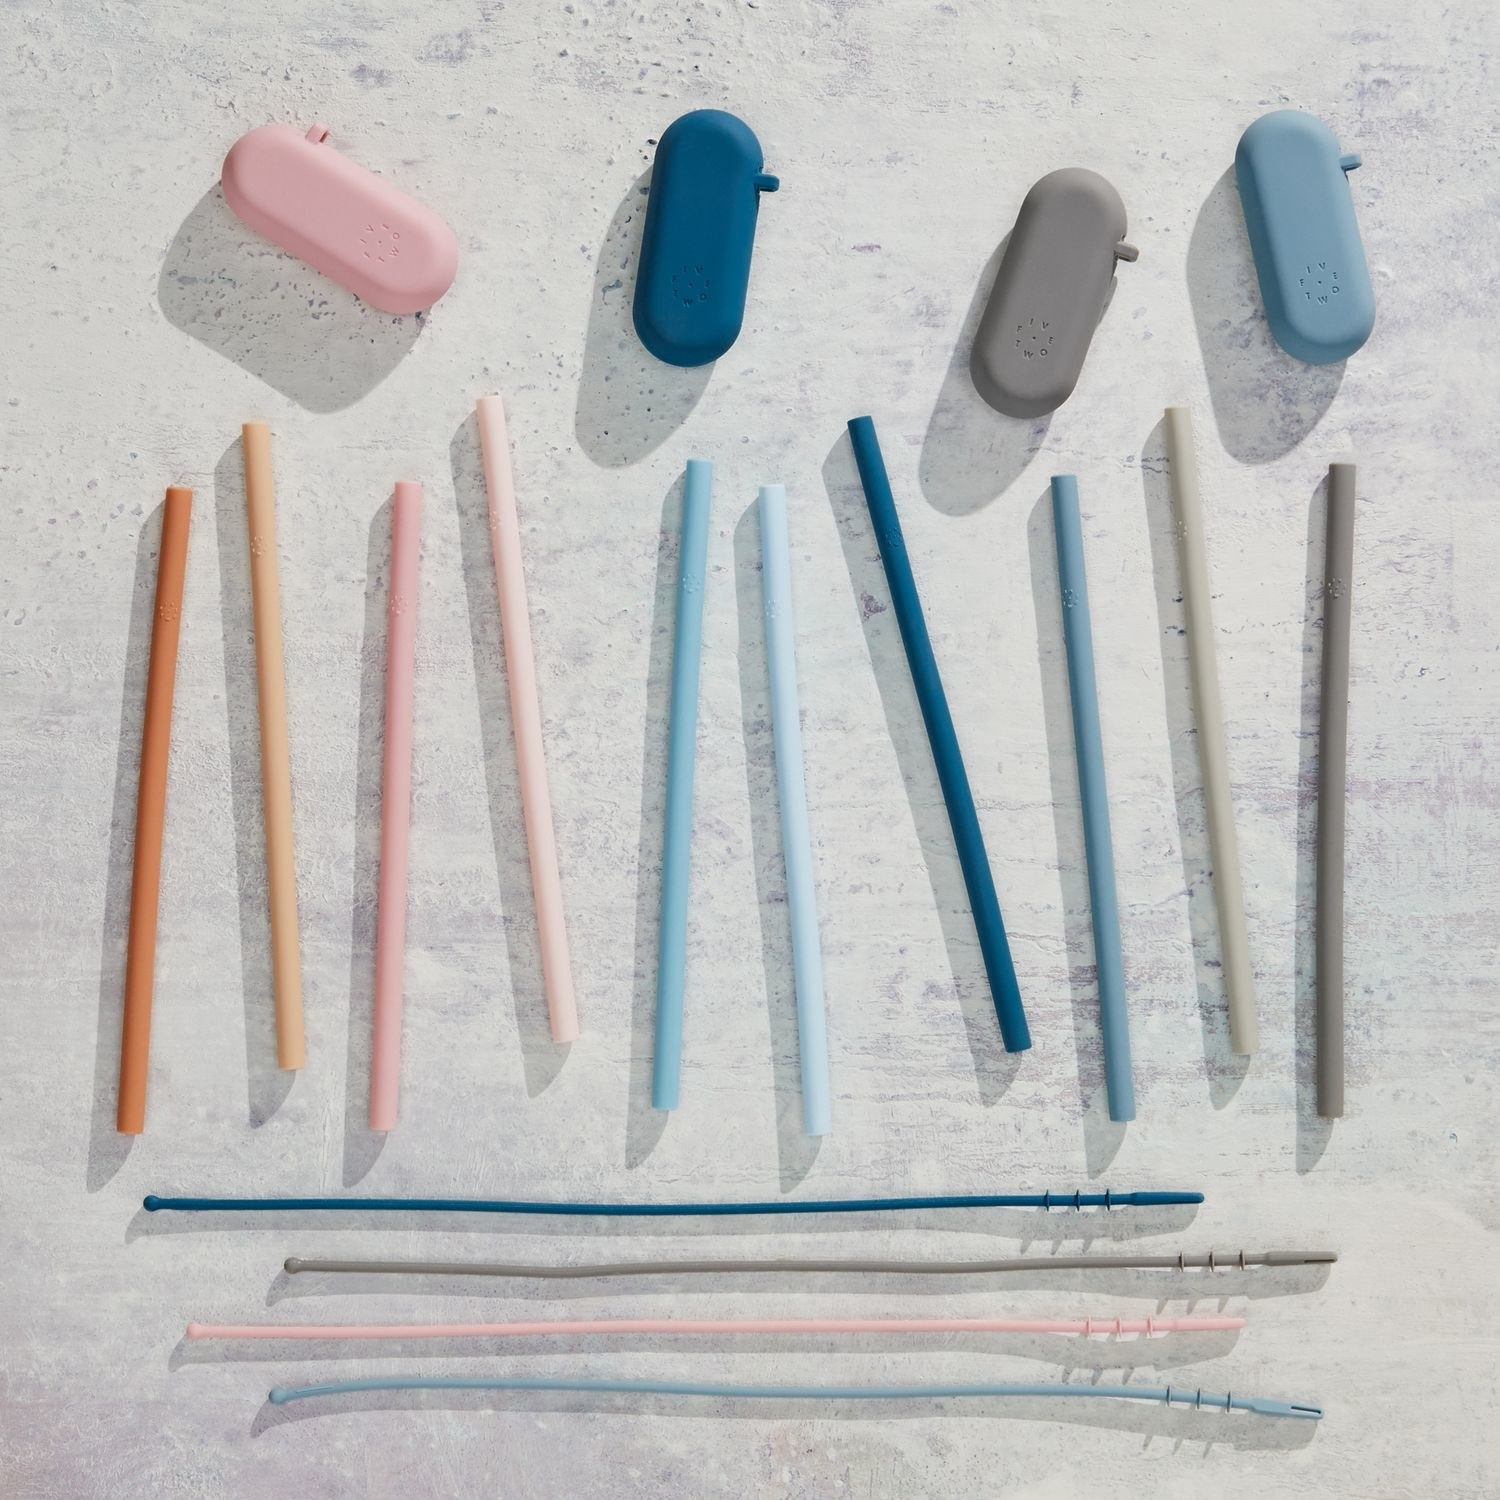 Ten reusable silicone straws, four travel cases, and four cleaning squeegees laid out on a gray surface 